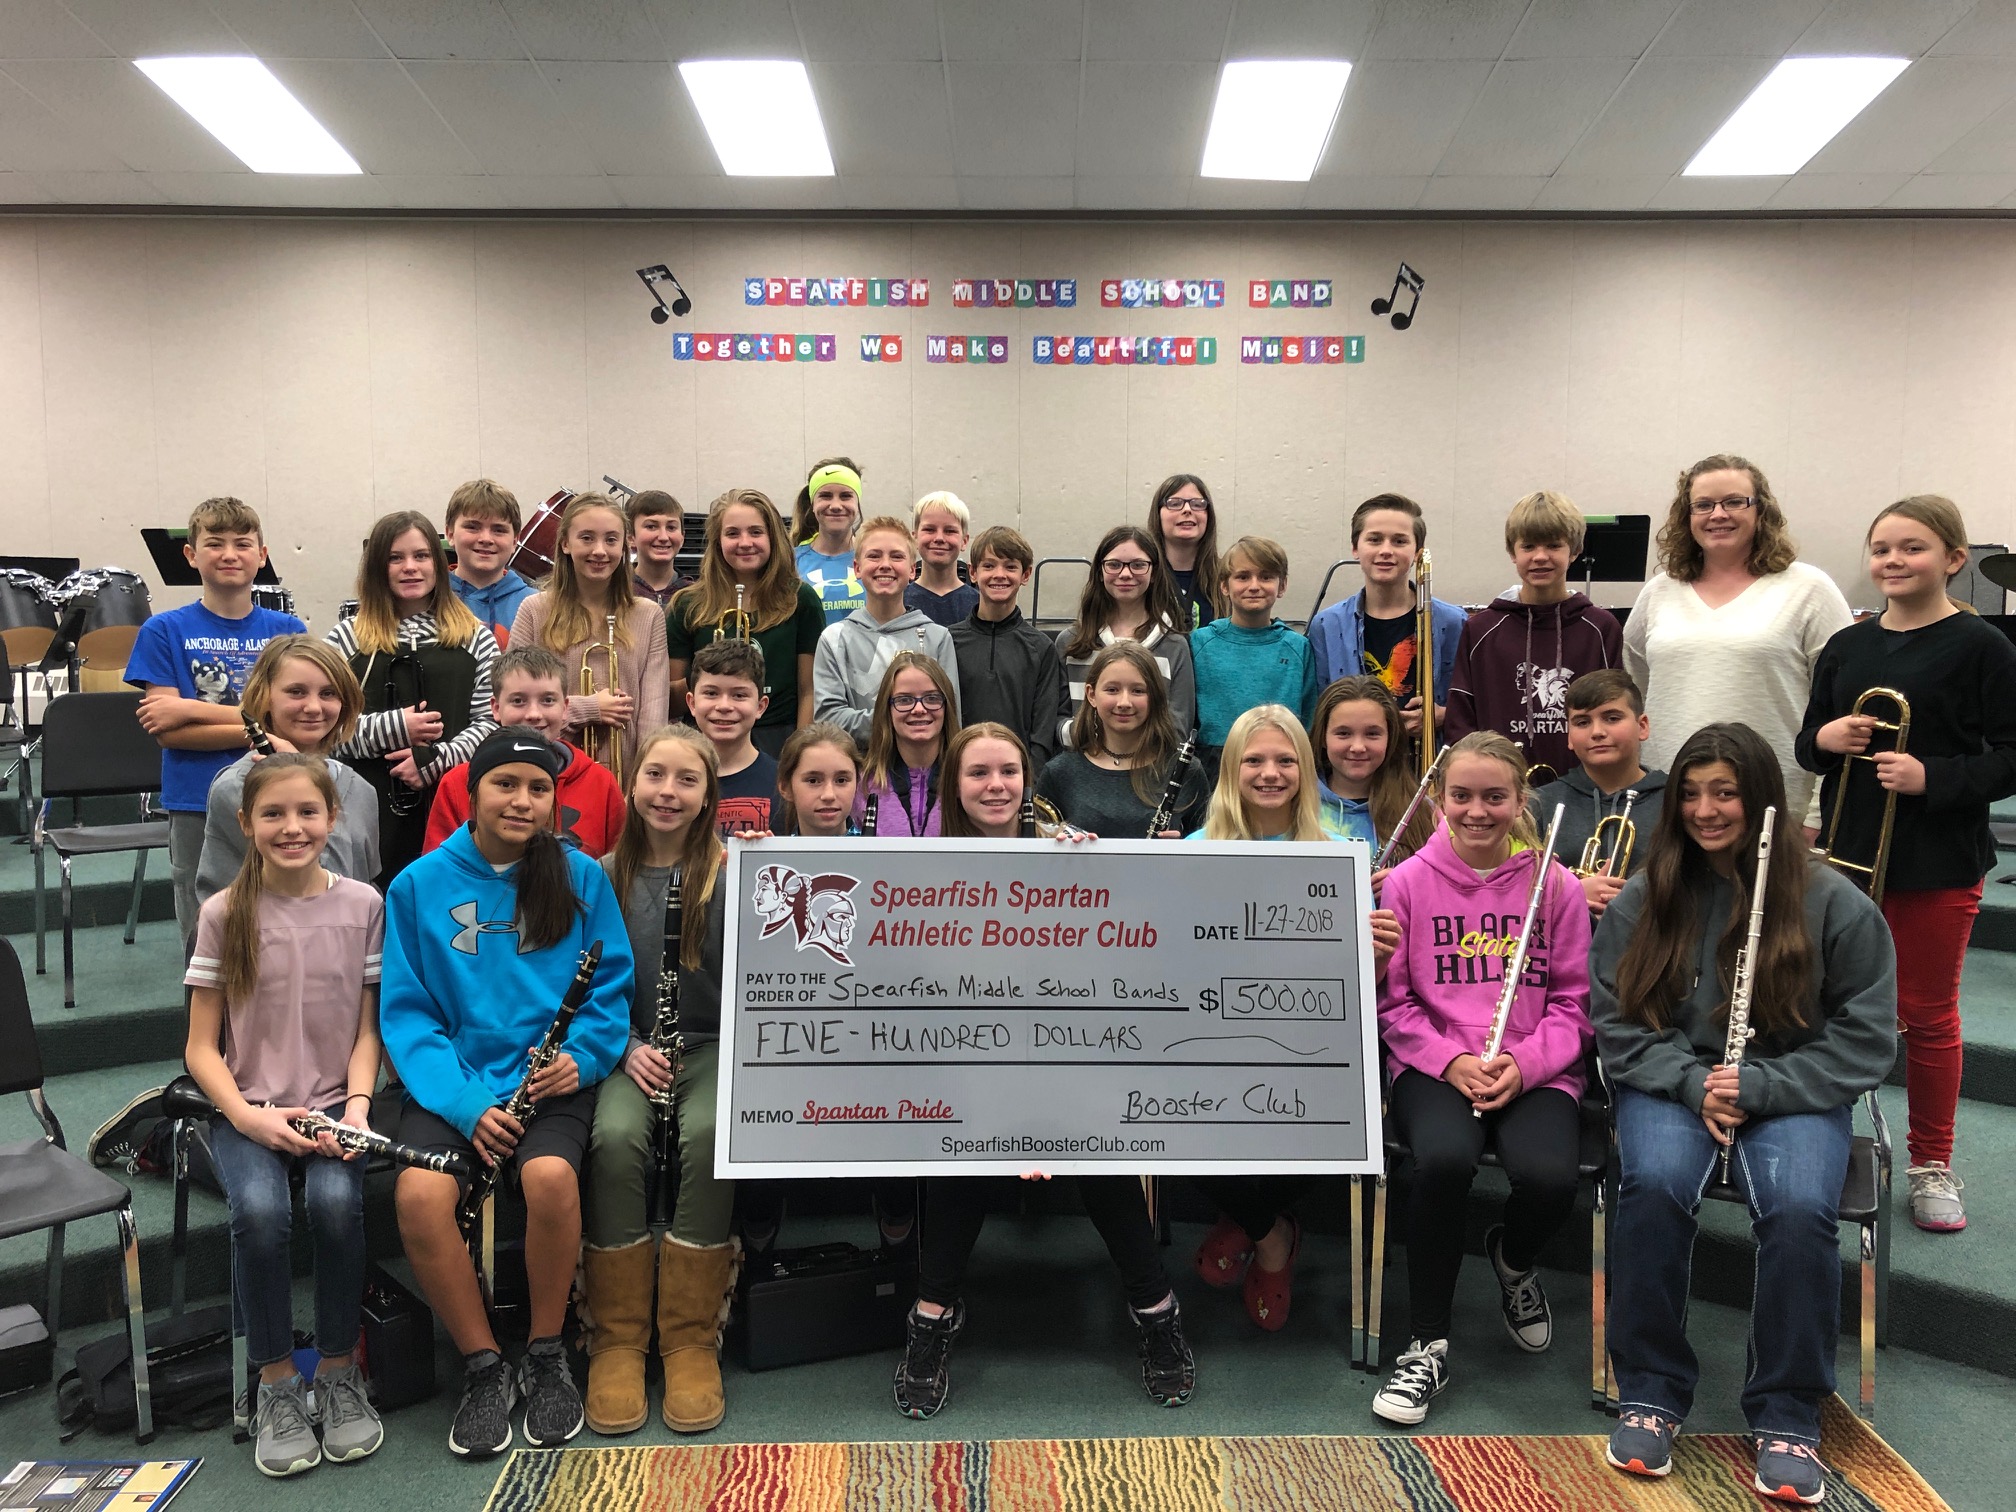 The Spearfish Spartan Athletic Booster Club presented a check in the amount of $500 to the Spearfish Middle School Band Program in gratitude for encouraging students to become involved in band, in hopes that they will continue on with their love of music at the high school level. The Booster Club’s mission is to recognize student athletes and boost school spirit and community pride. Pictured are members of the 7th grade band with Mrs. Case, the middle school band director.